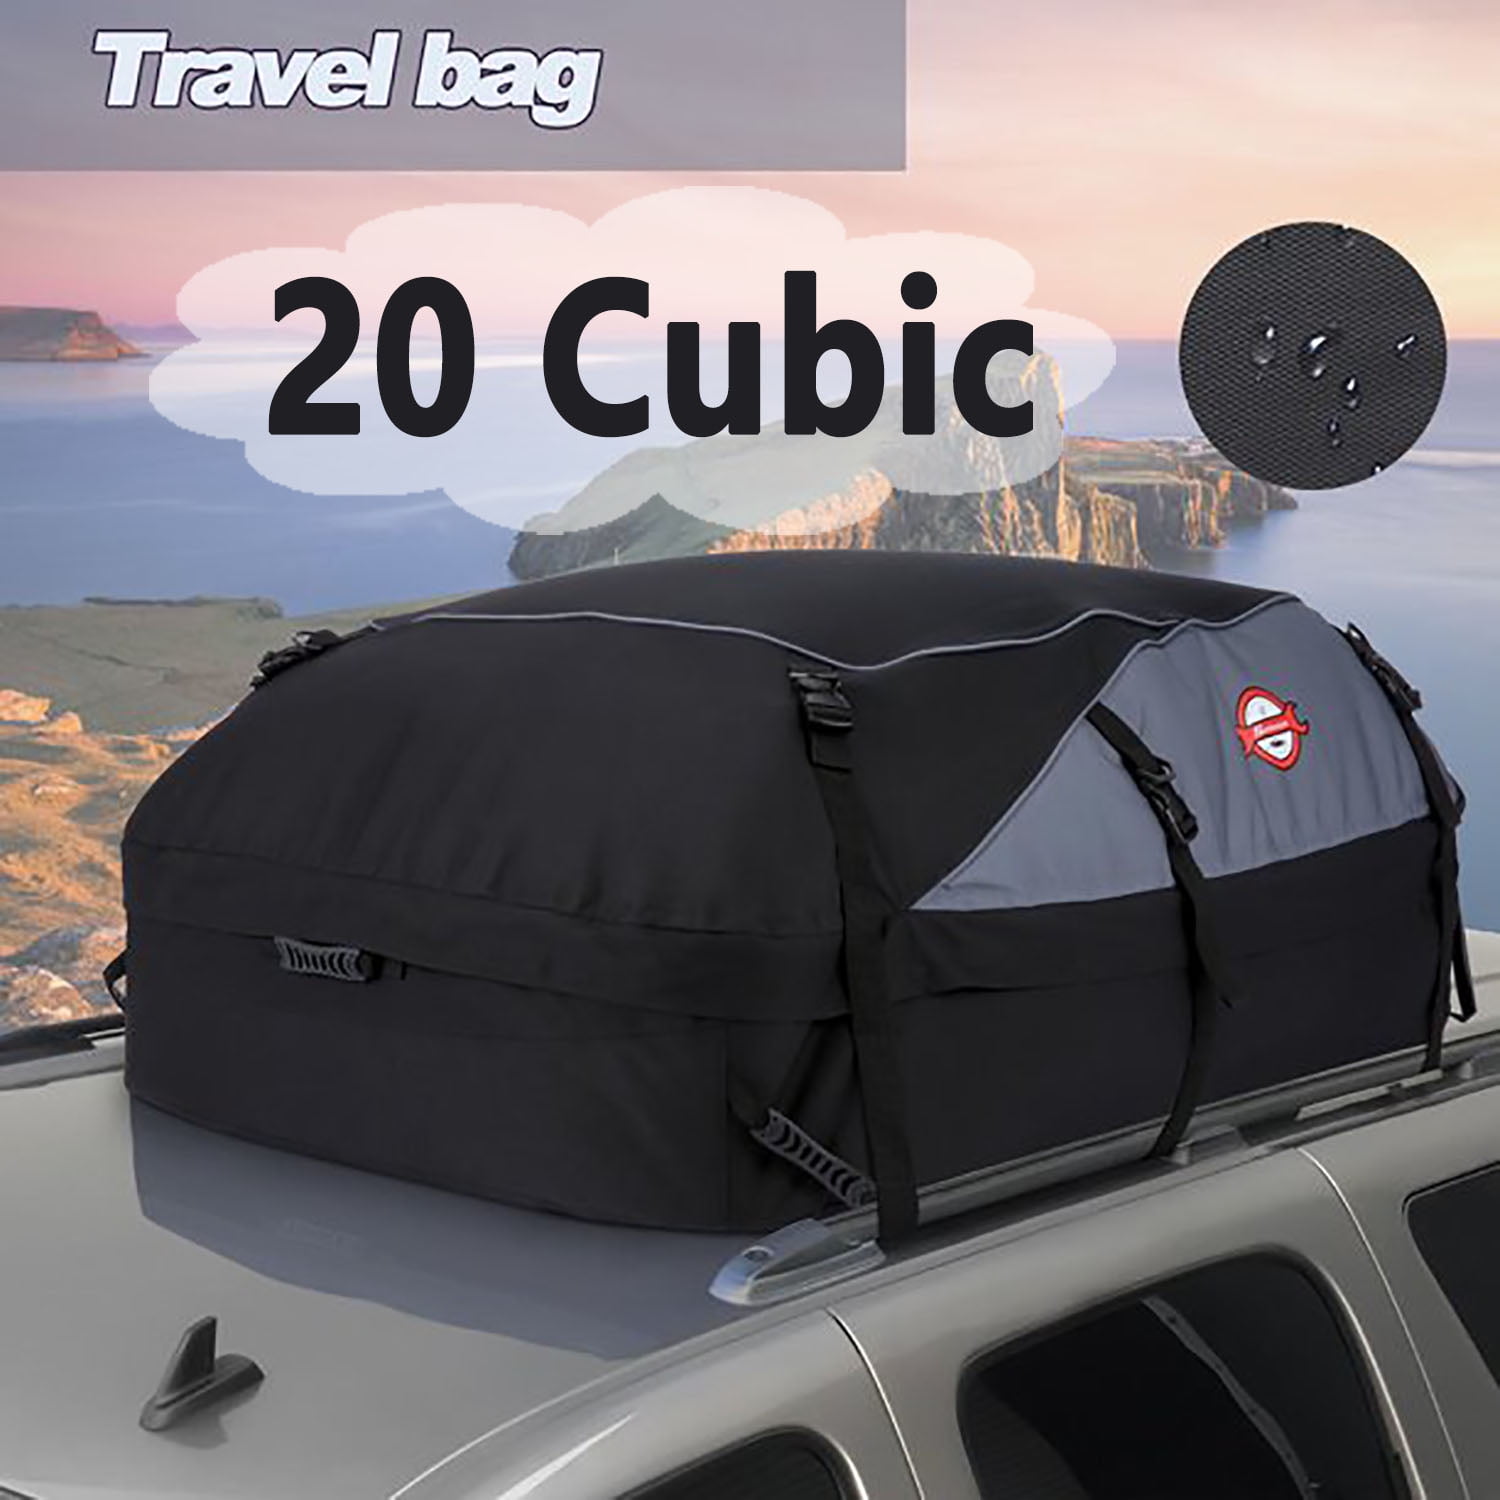 Portable and Waterproof Car Roof Bag Heavy Duty Bag Fits All Cars with/without Rack Car Rooftop Cargo Carrier Bag Perfect for Camping Self-driving Tour 